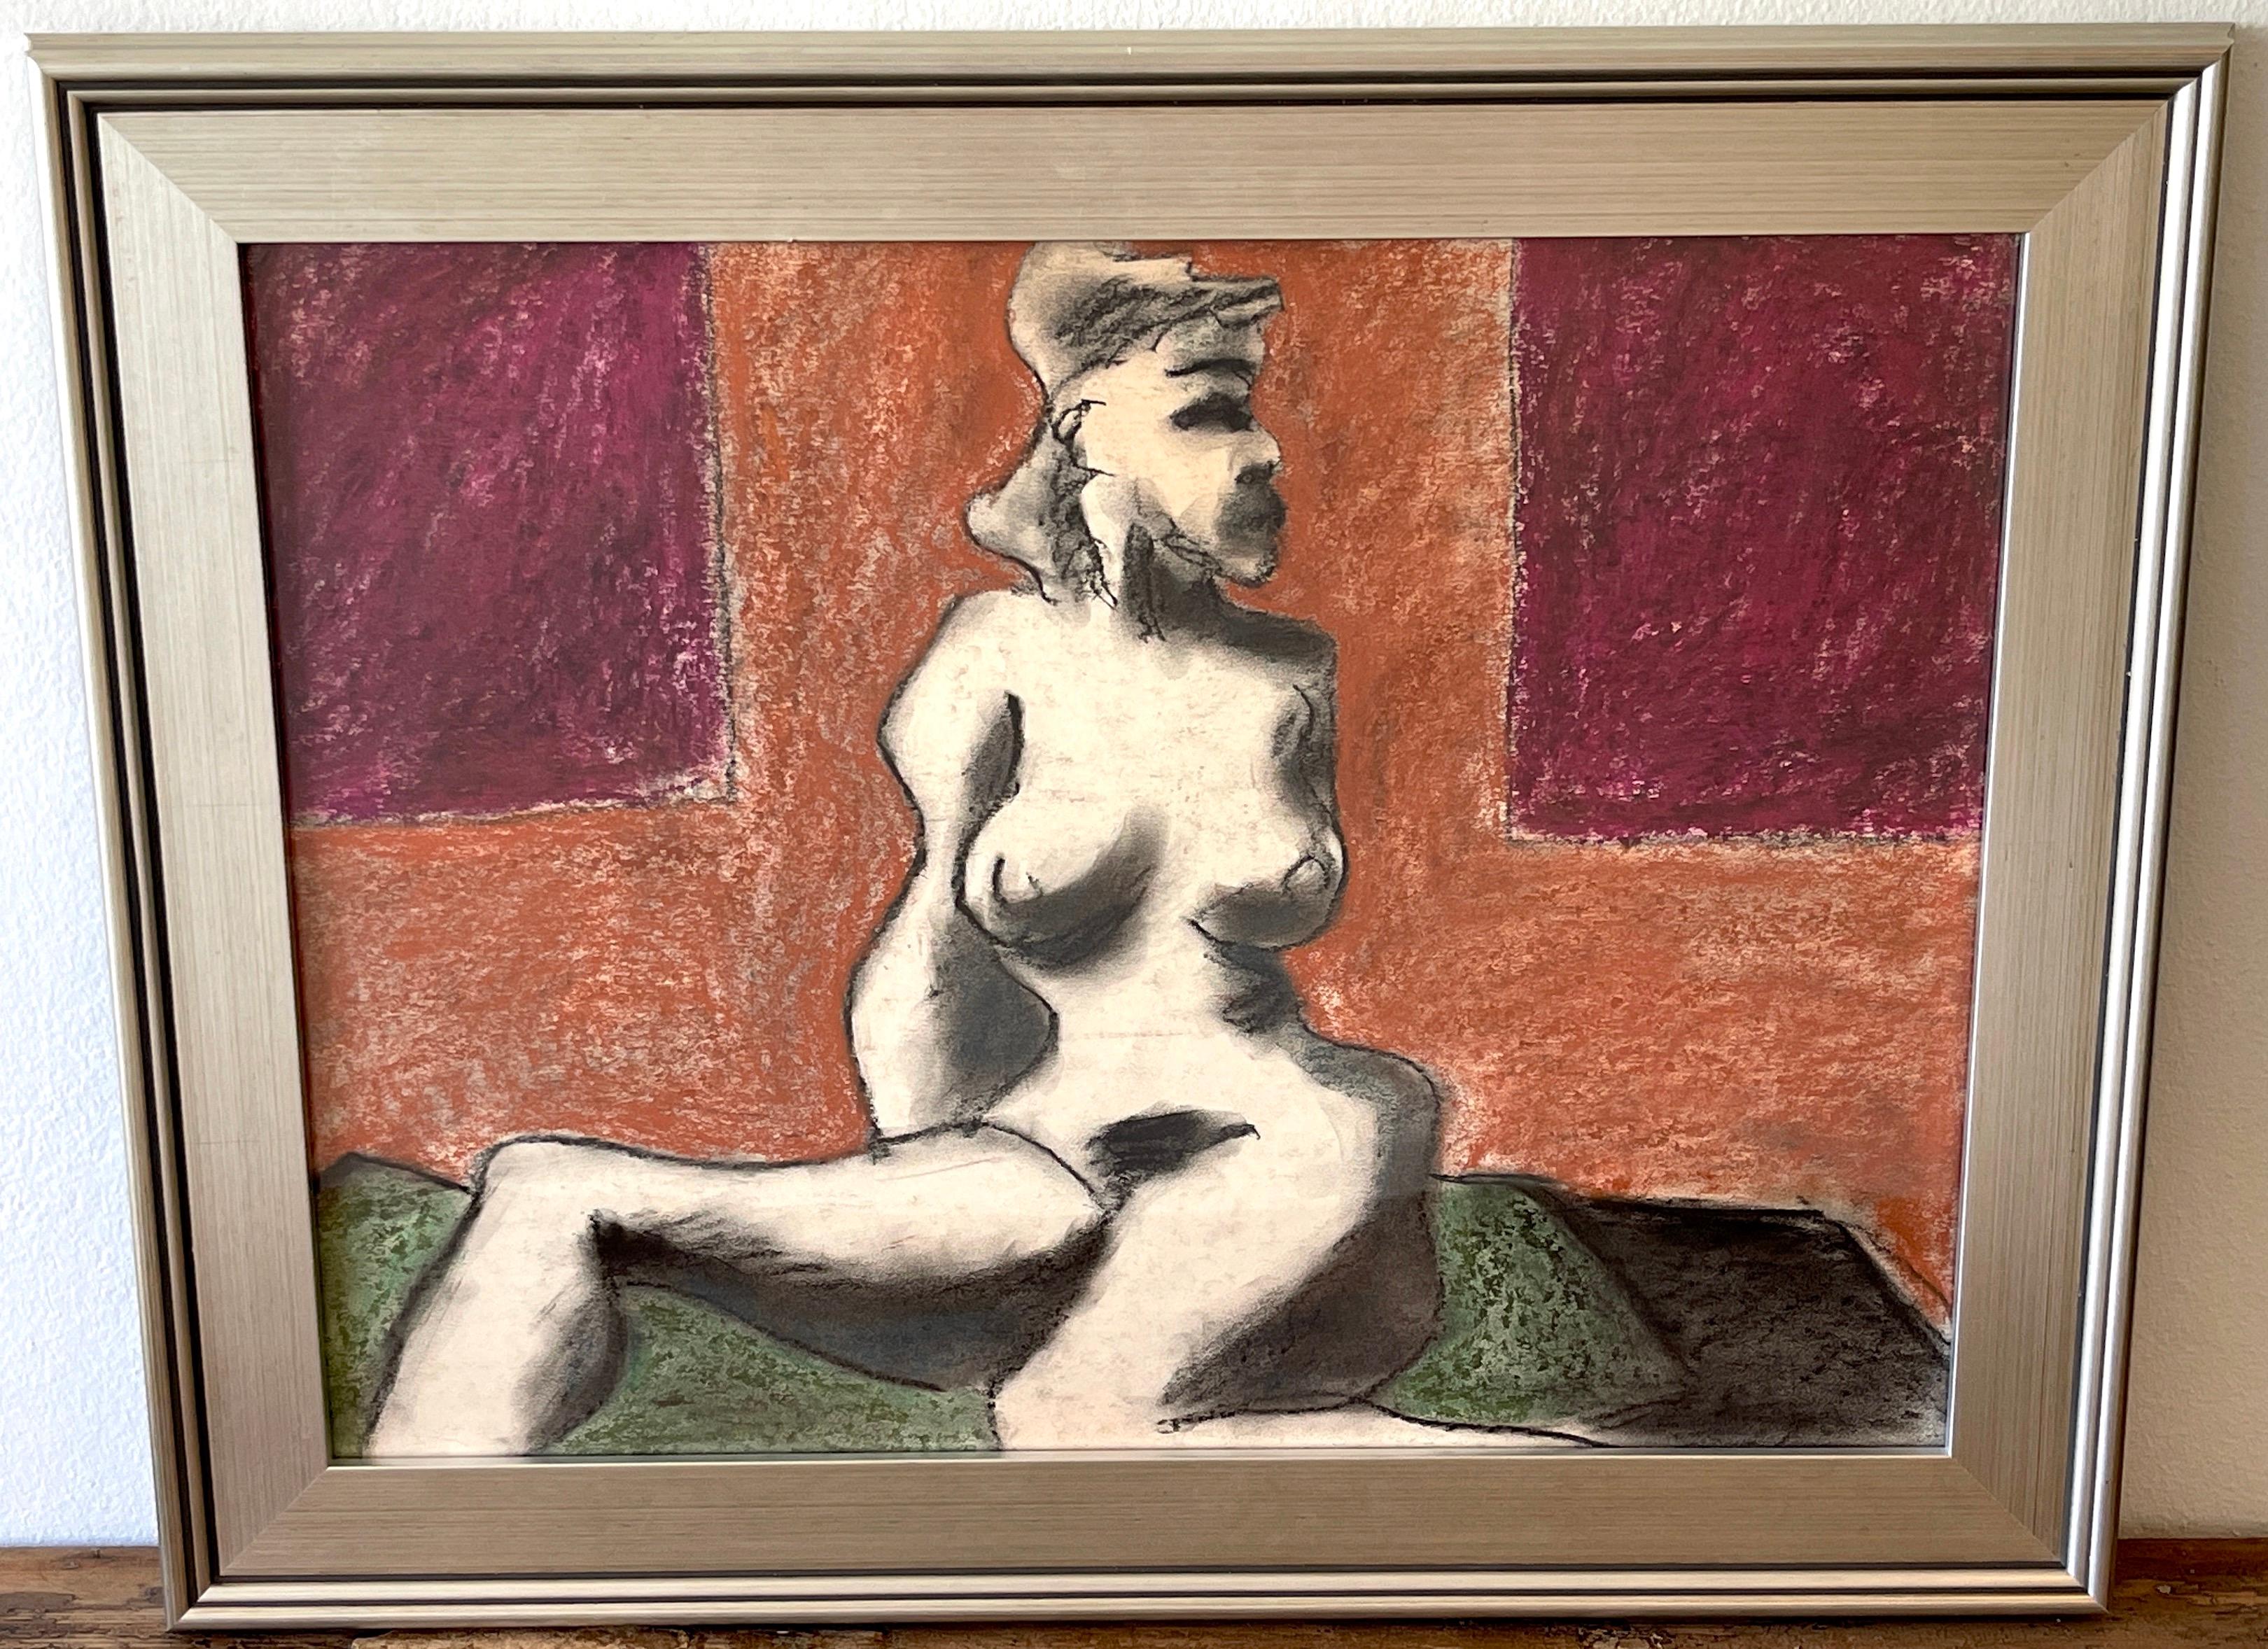 'Seated Female Nude' oil/mixed media on paper, 1960s by Douglas D. Peden 
USA, 1933-2015, Listed Modern Painter, Mathematician & Scholar
Oil/Mixed Media on Paper 
Signed in Pencil on Back 'Douglas Peden' 
This work measures 18-Inches x 24-Inches